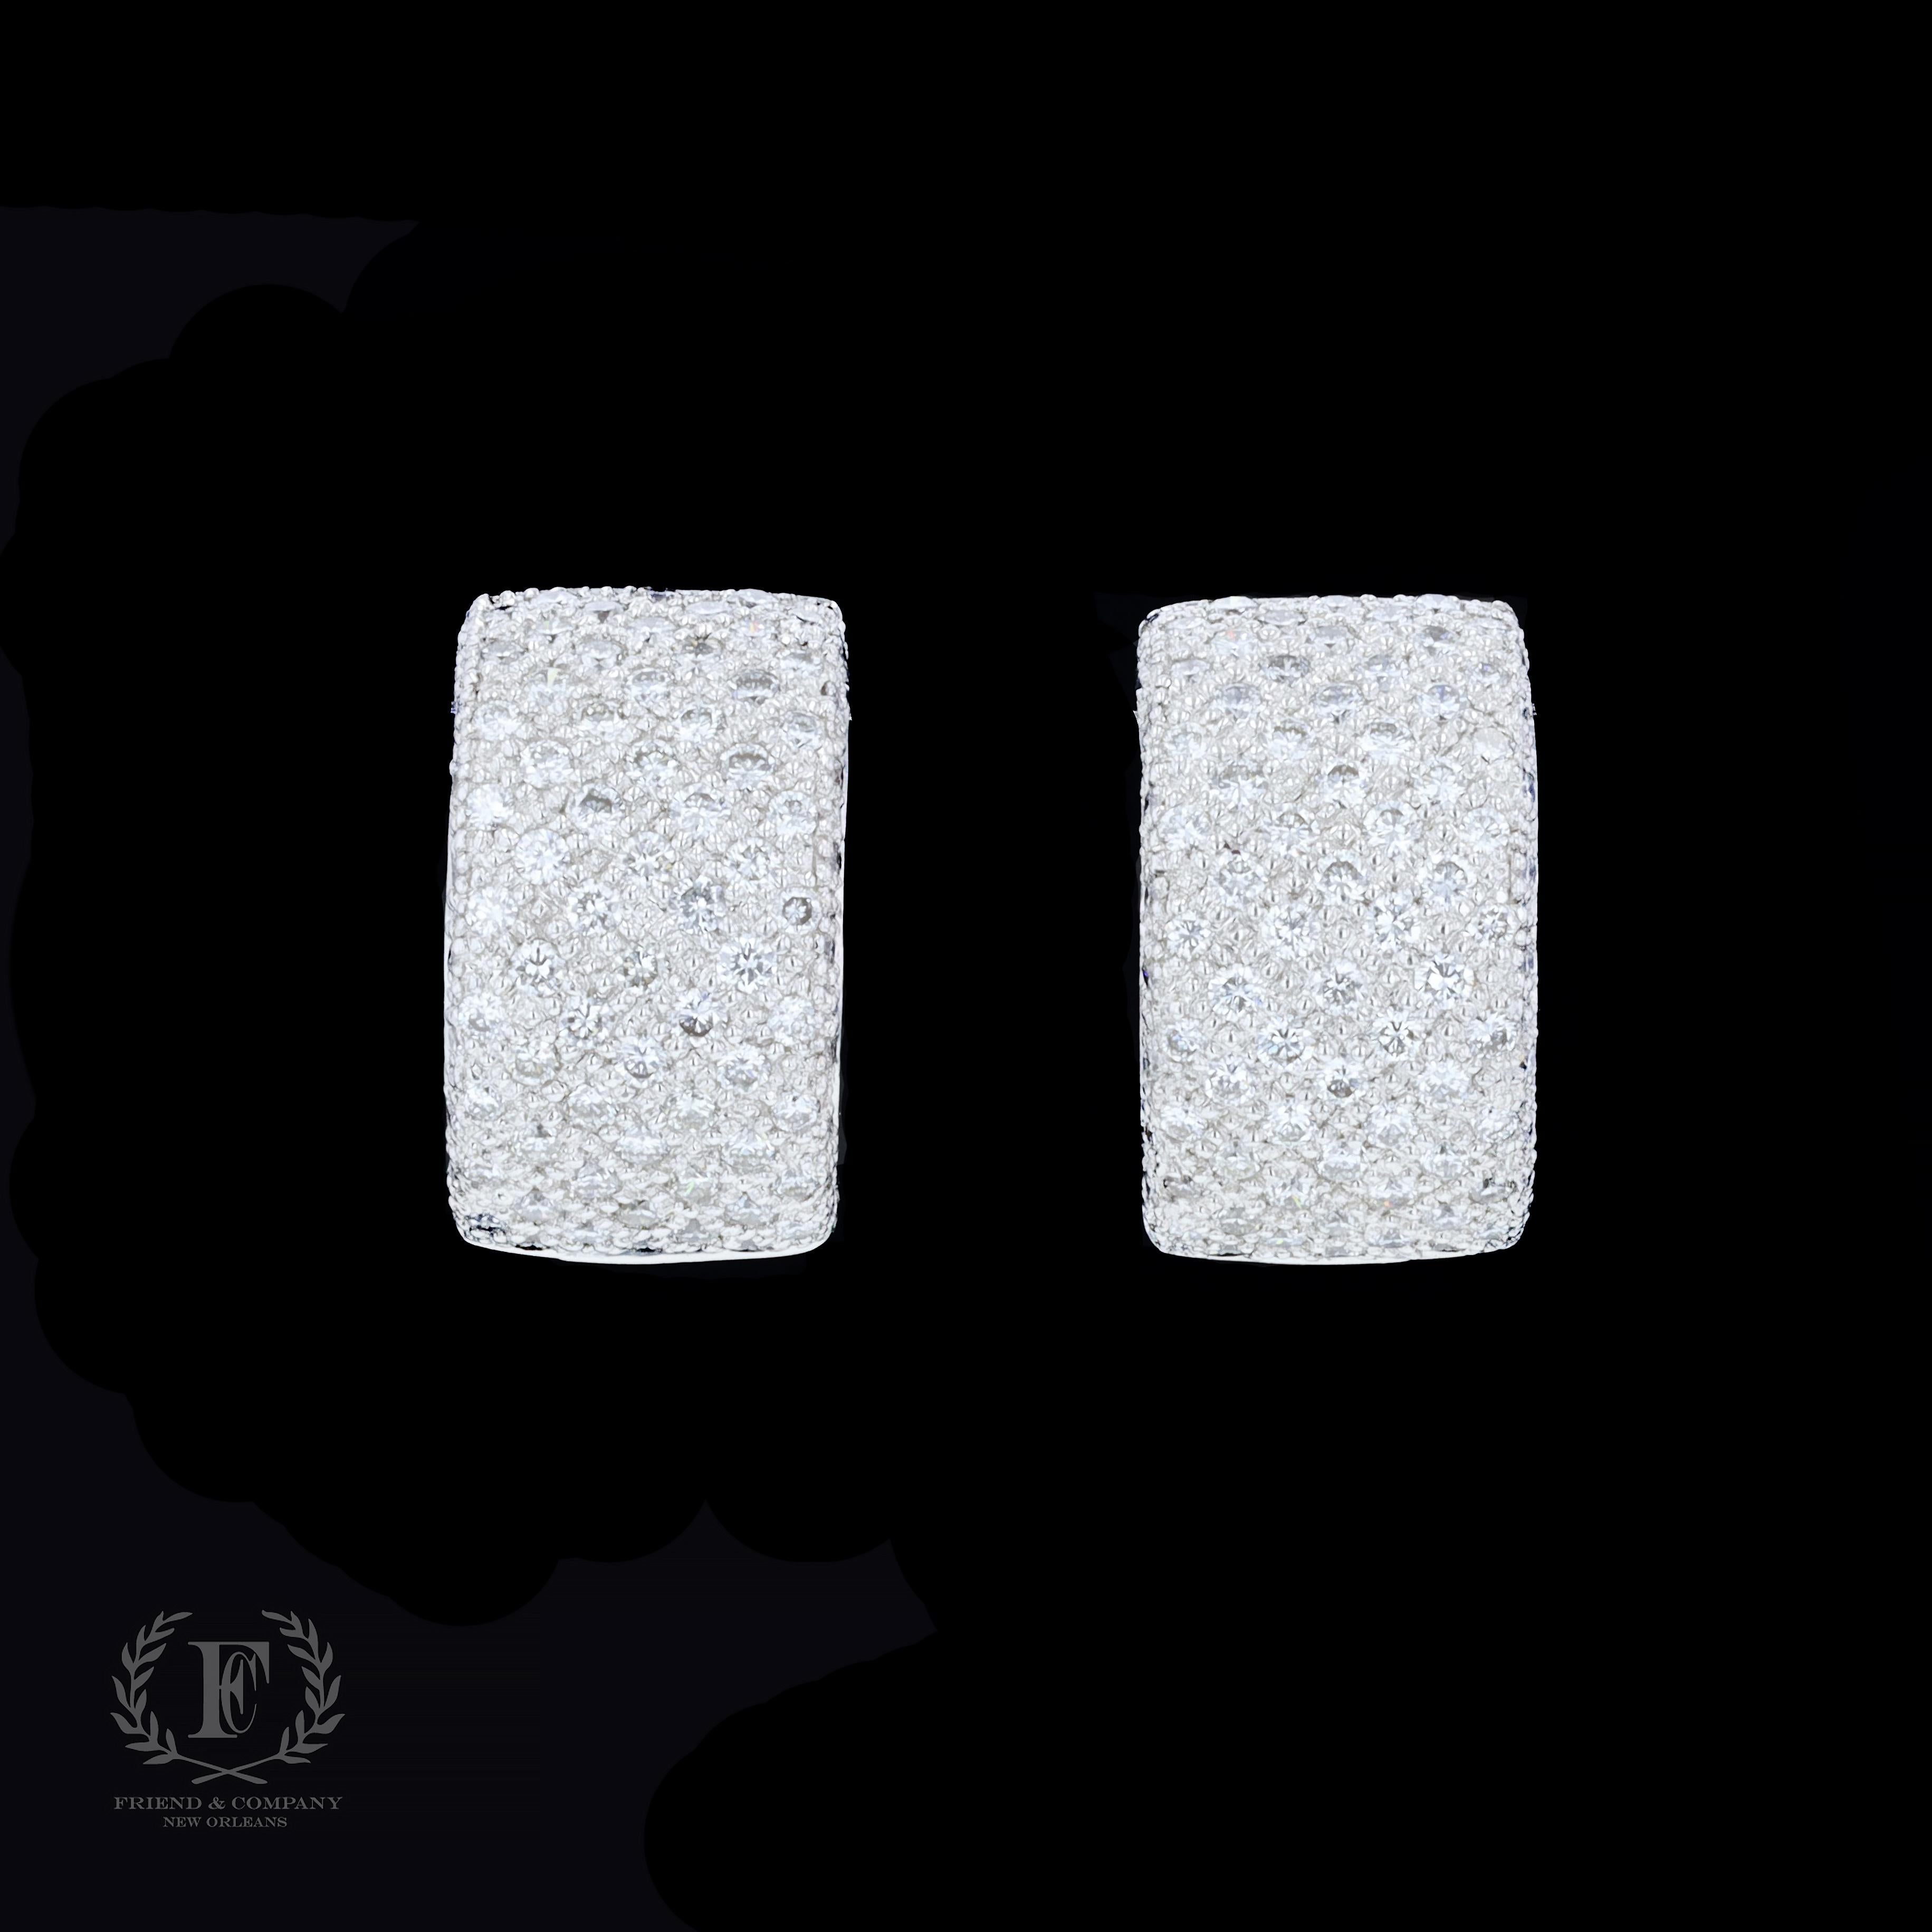 The glamorous diamond earrings feature round cut diamonds that weigh approximately 2.00 carats. The color of the diamonds is G and the clarity is VS. They also feature secure lever-back closures. The earrings measure 16mm by 10mm and weigh 15.8